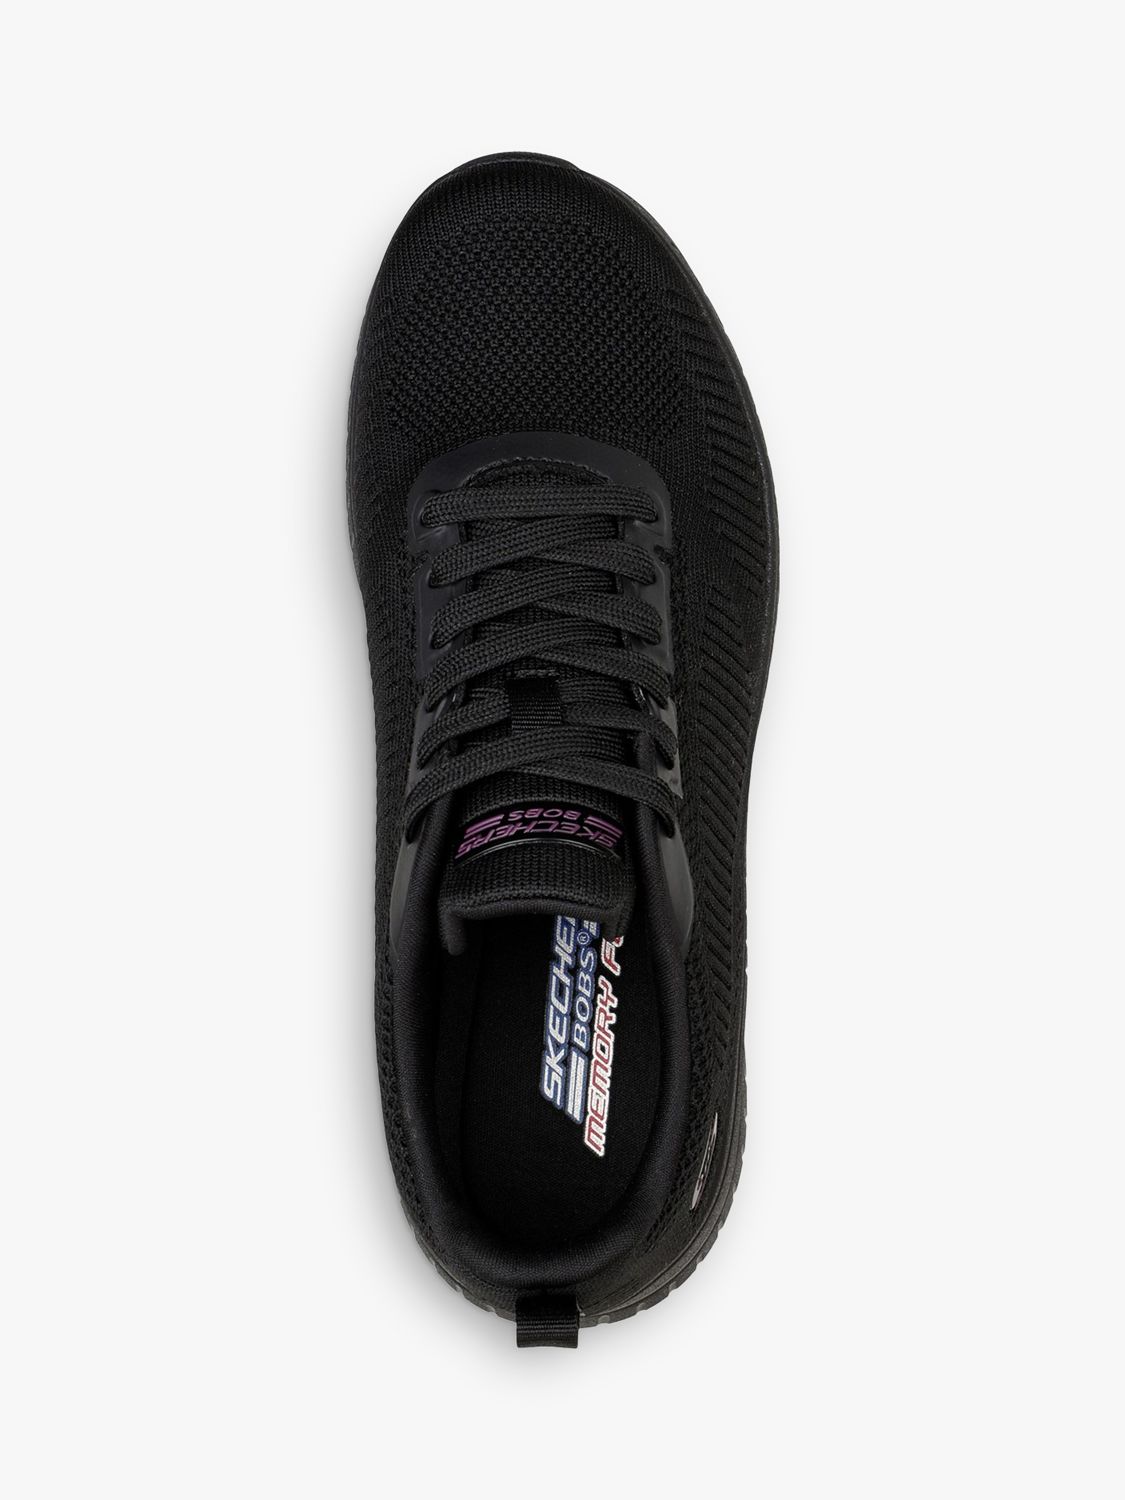 Buy Skechers BOBS Squad Chaos Face Off Trainers Online at johnlewis.com